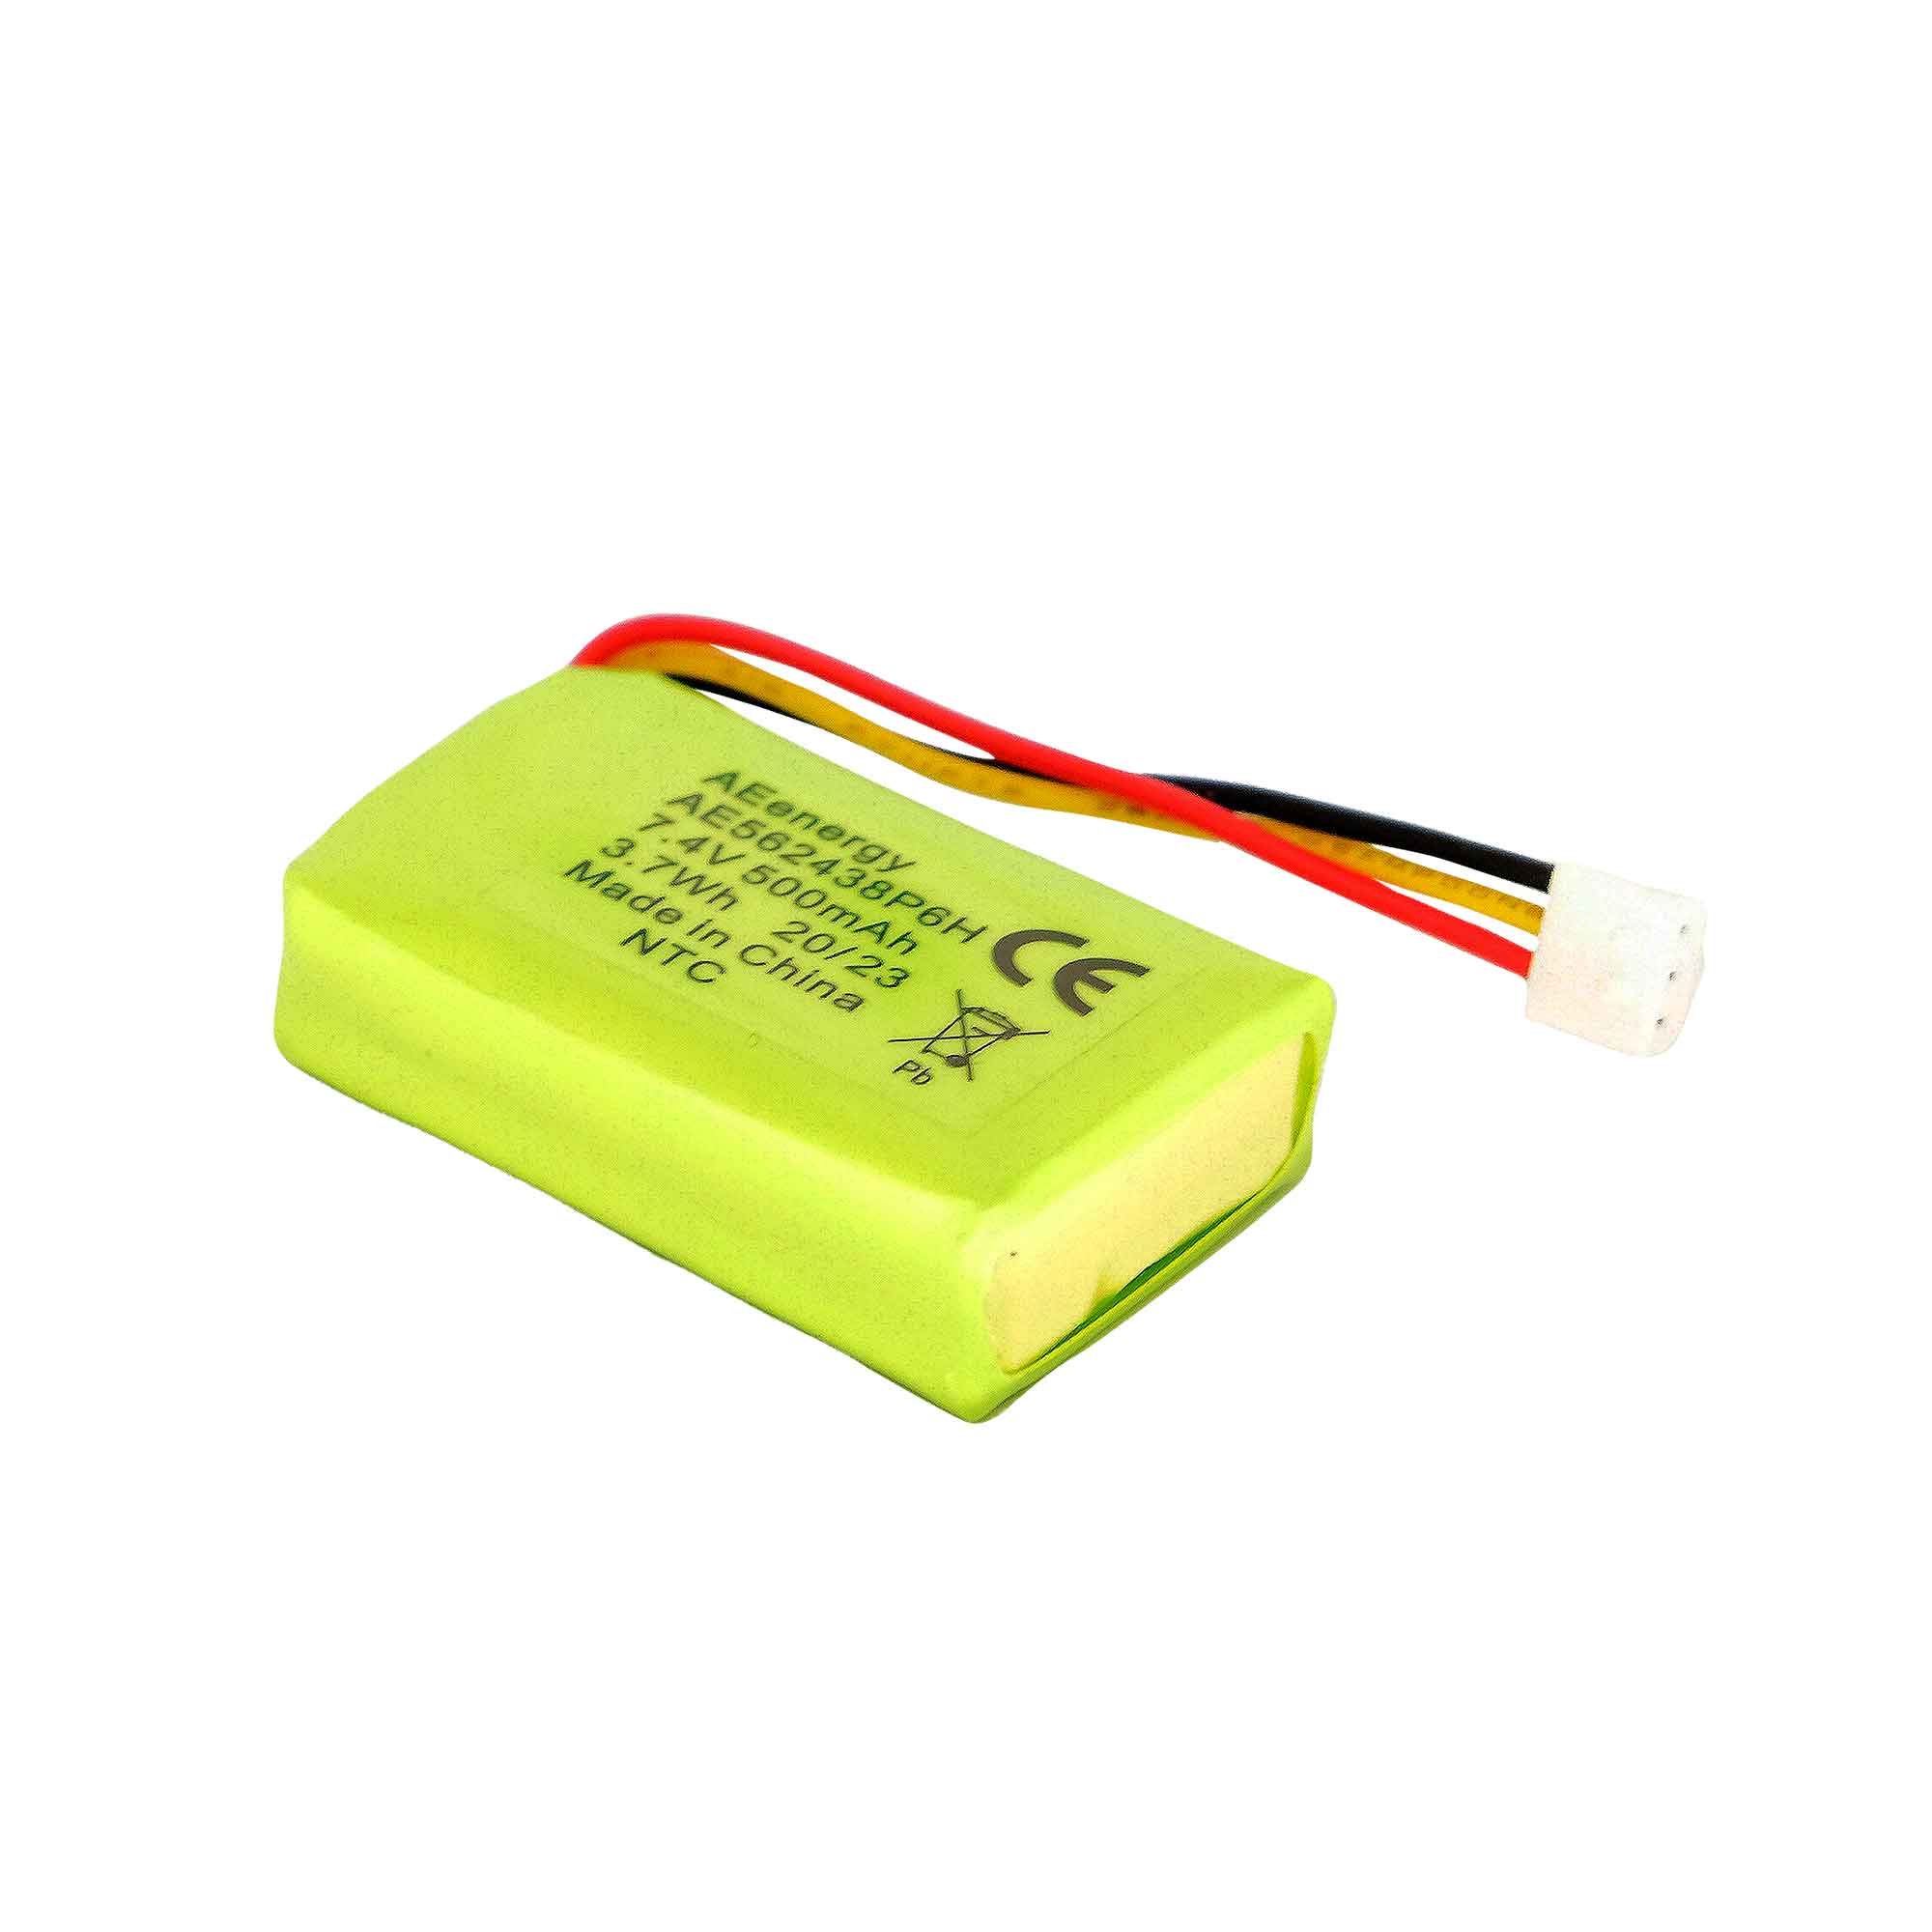 bp74r3p Replacement Receiver Battery for 2300NCP, 3500NCP, EDGE-RT, STB, 2700-DUAL